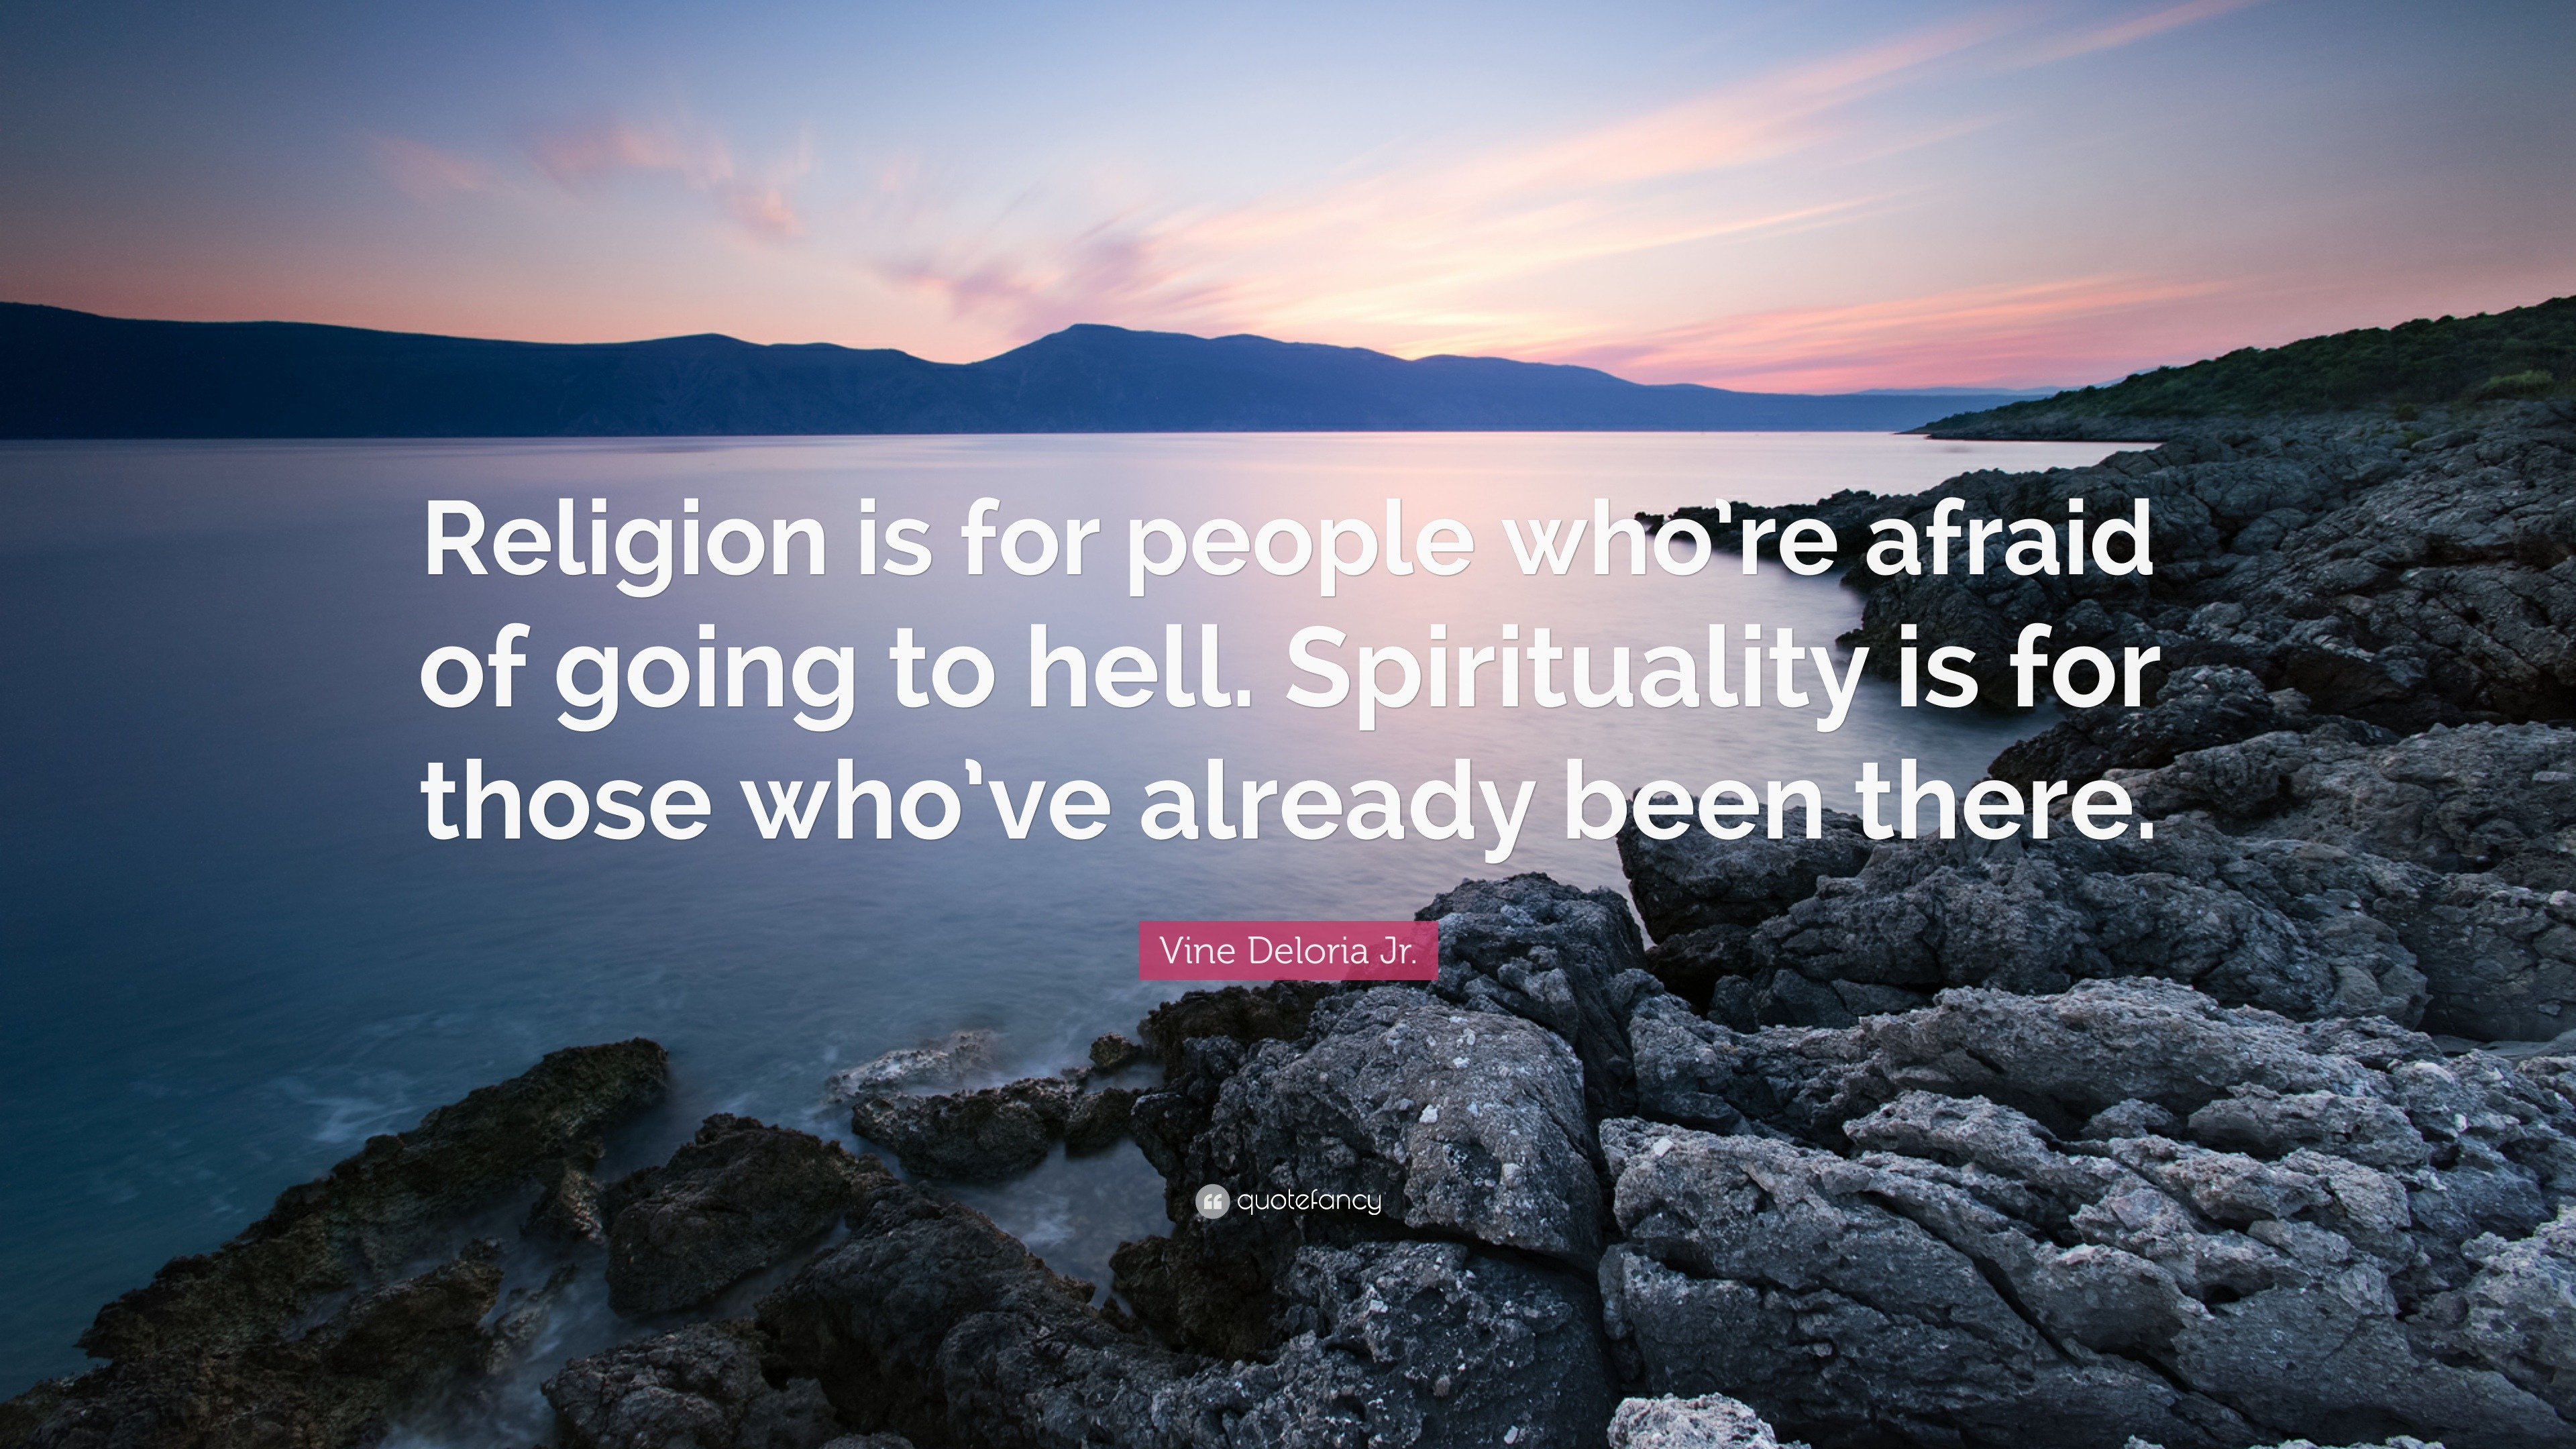 Vine Deloria Jr. Quote: "Religion is for people who're afraid of going to hell. Spirituality is ...